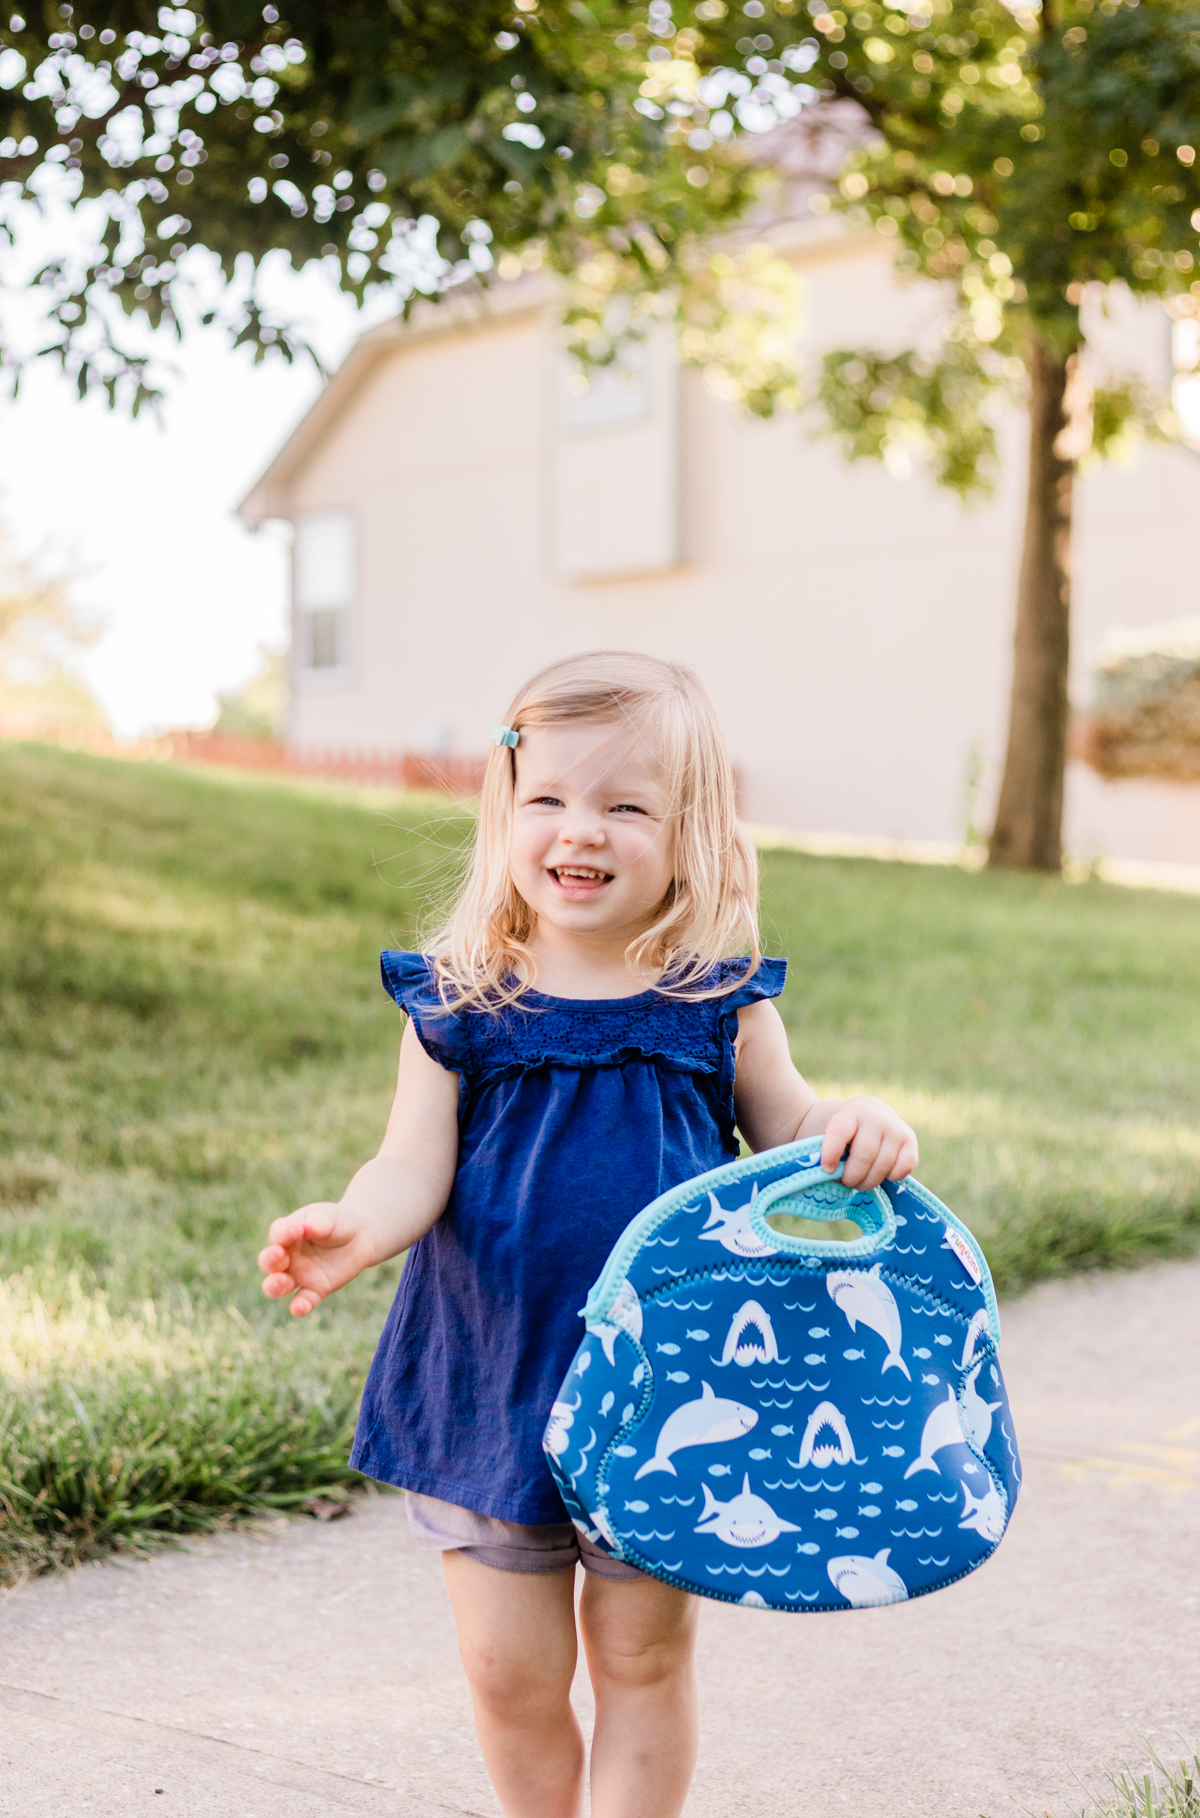 Our Favorite Backpacks And Lunchboxes You’ll Love This School Year